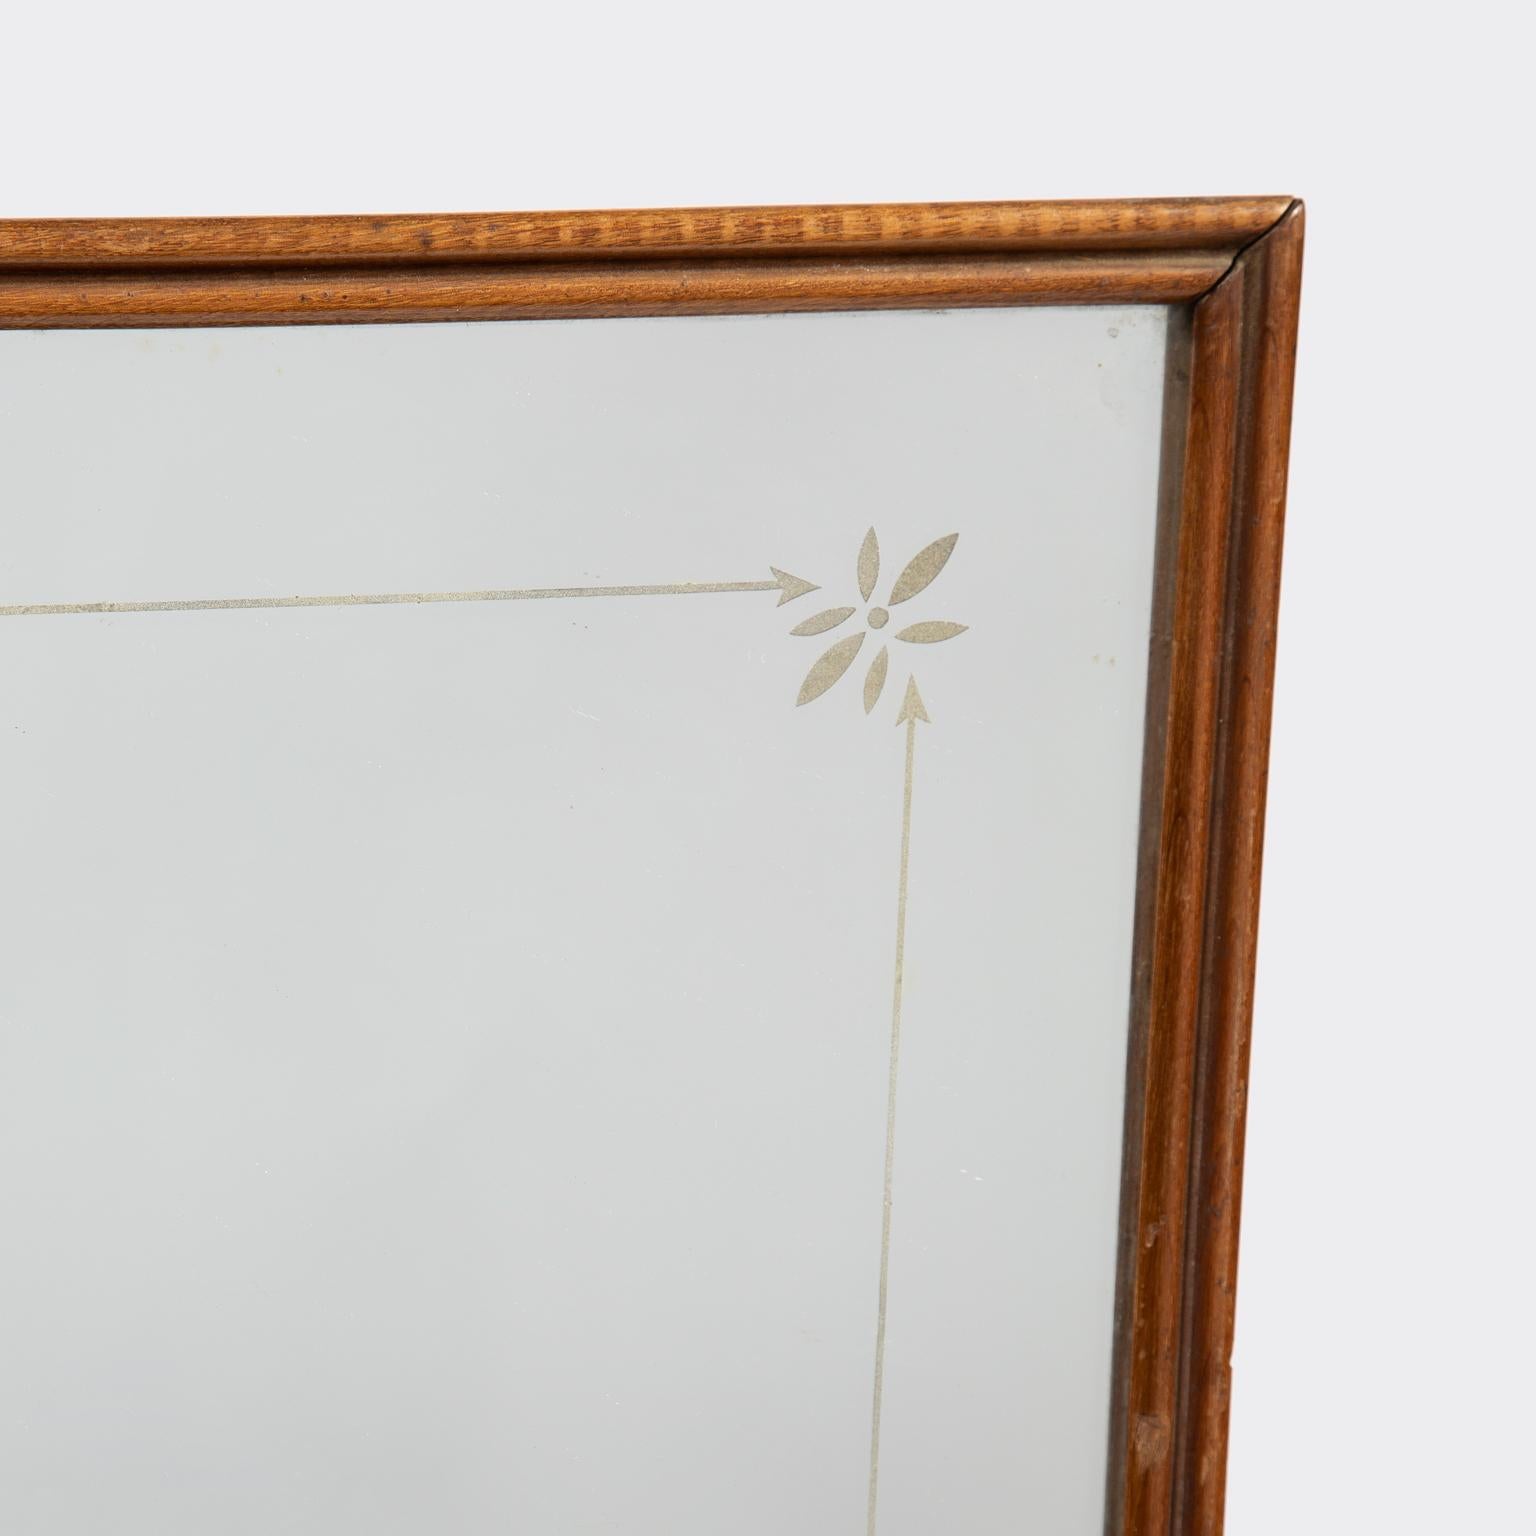 Slim mahogany frame mirror, with notch shaped top, and mirror glass with a delicate etched floral and arrow motif border.